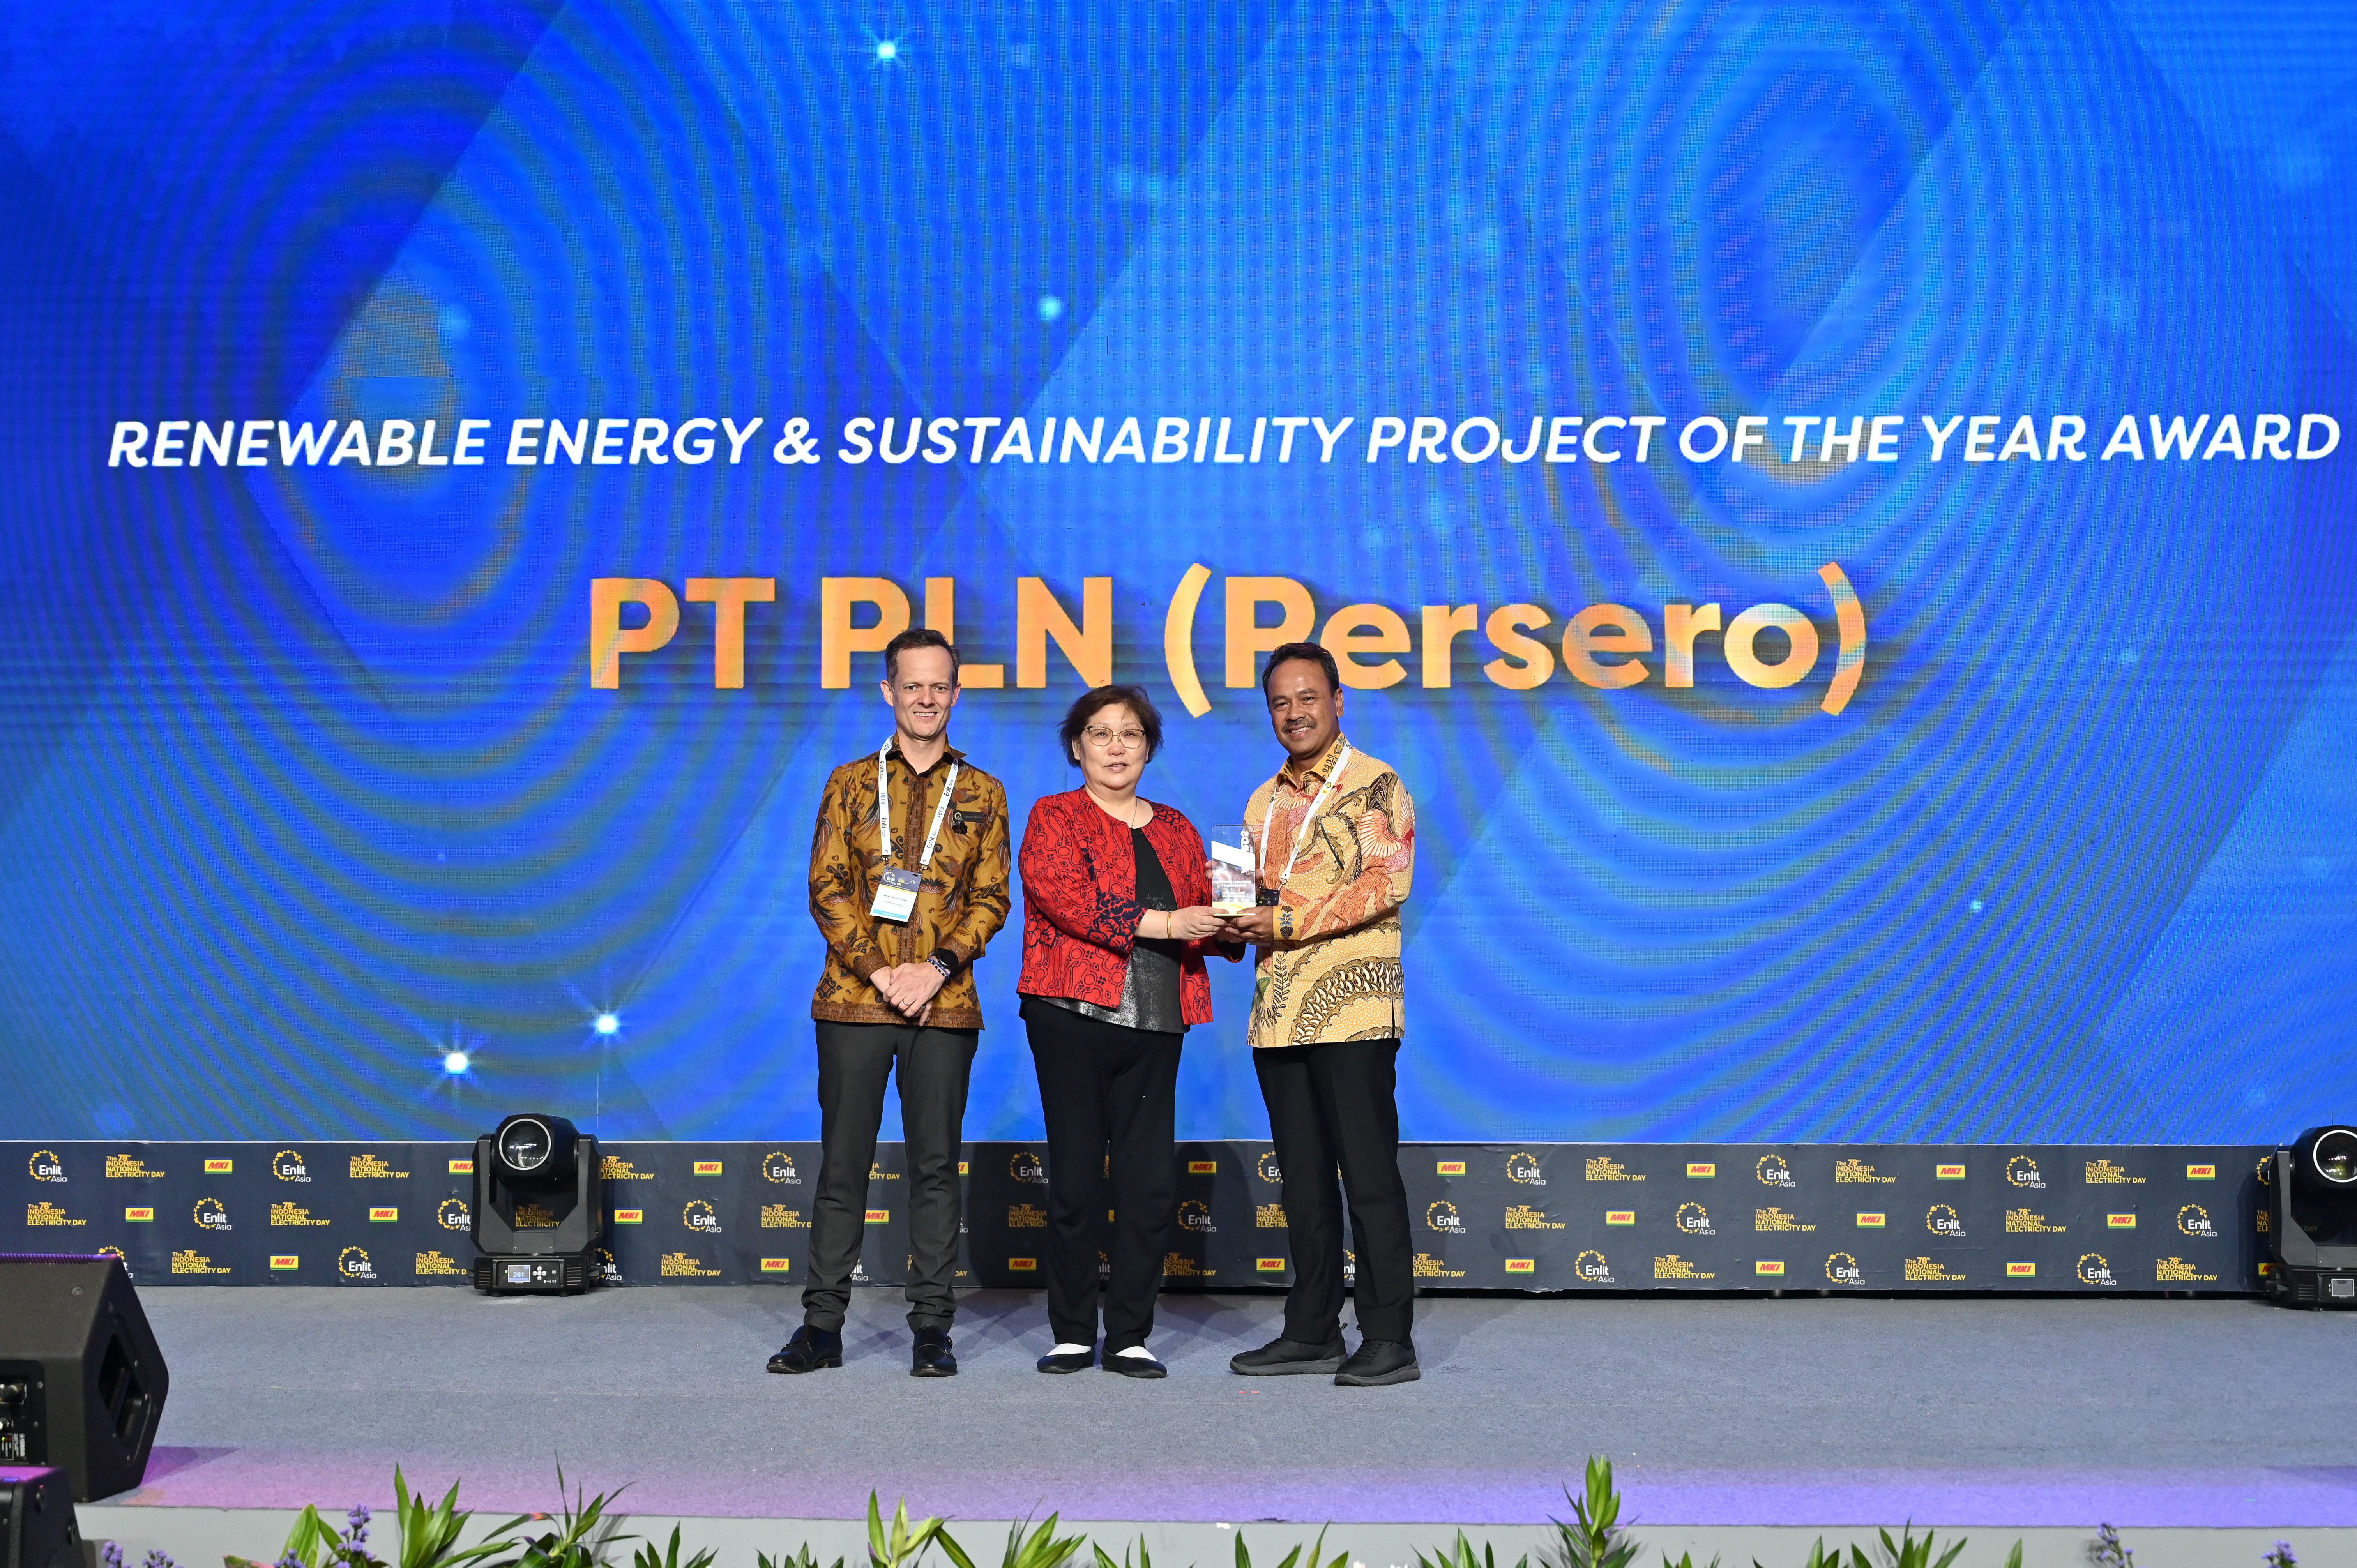 Renewable Energy & Sustainability Project of the Year